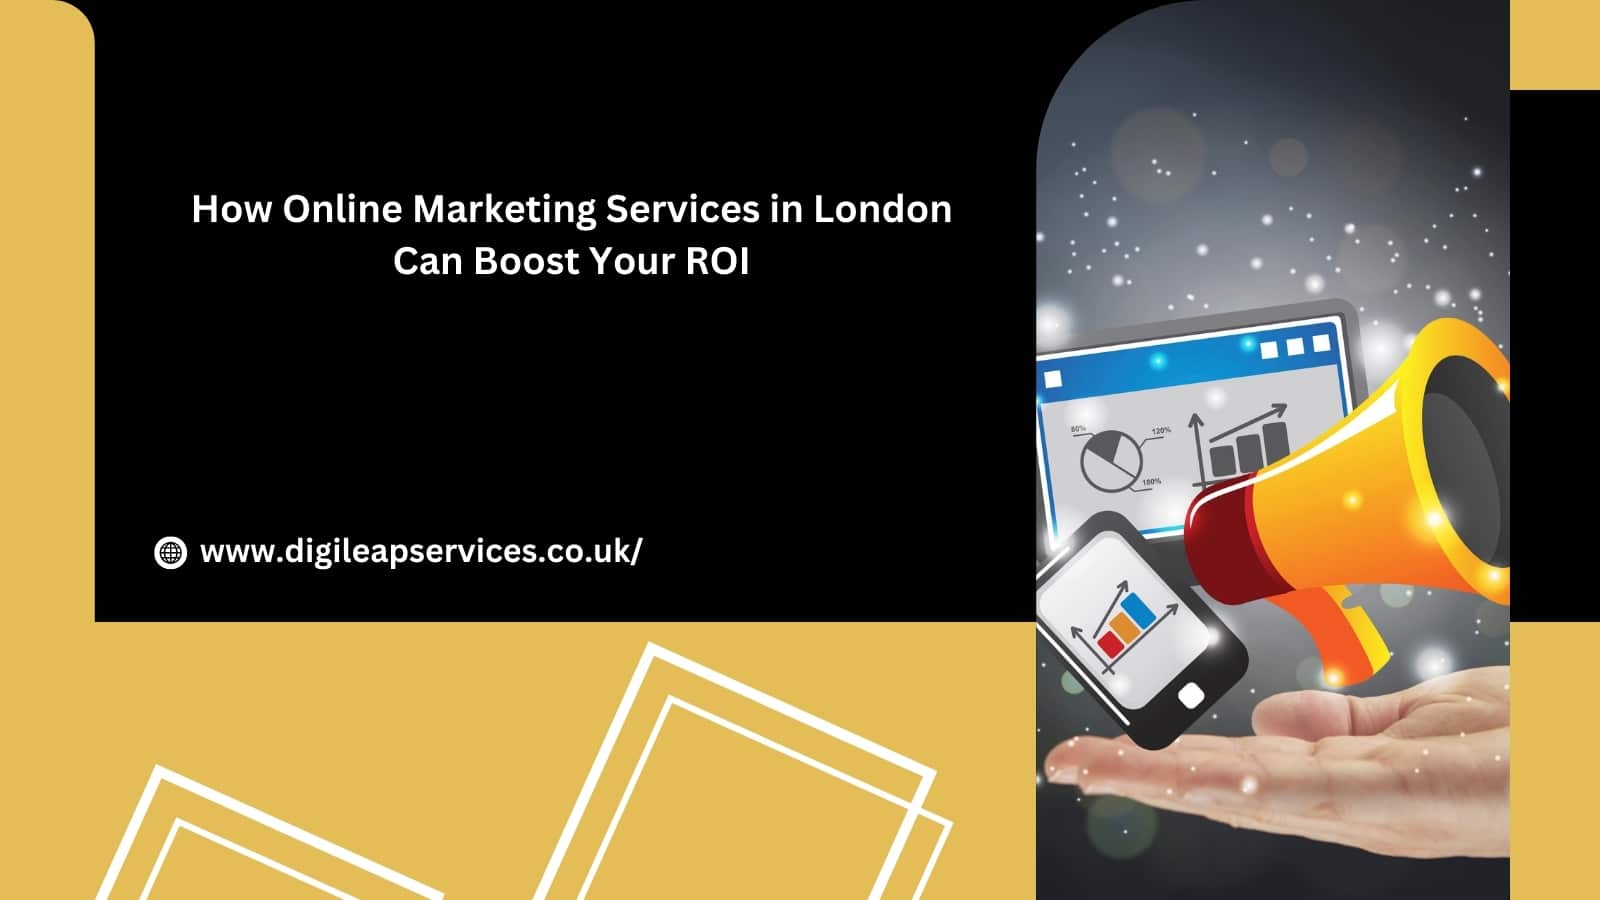 How Online Marketing Services in London Can Boost Your ROI